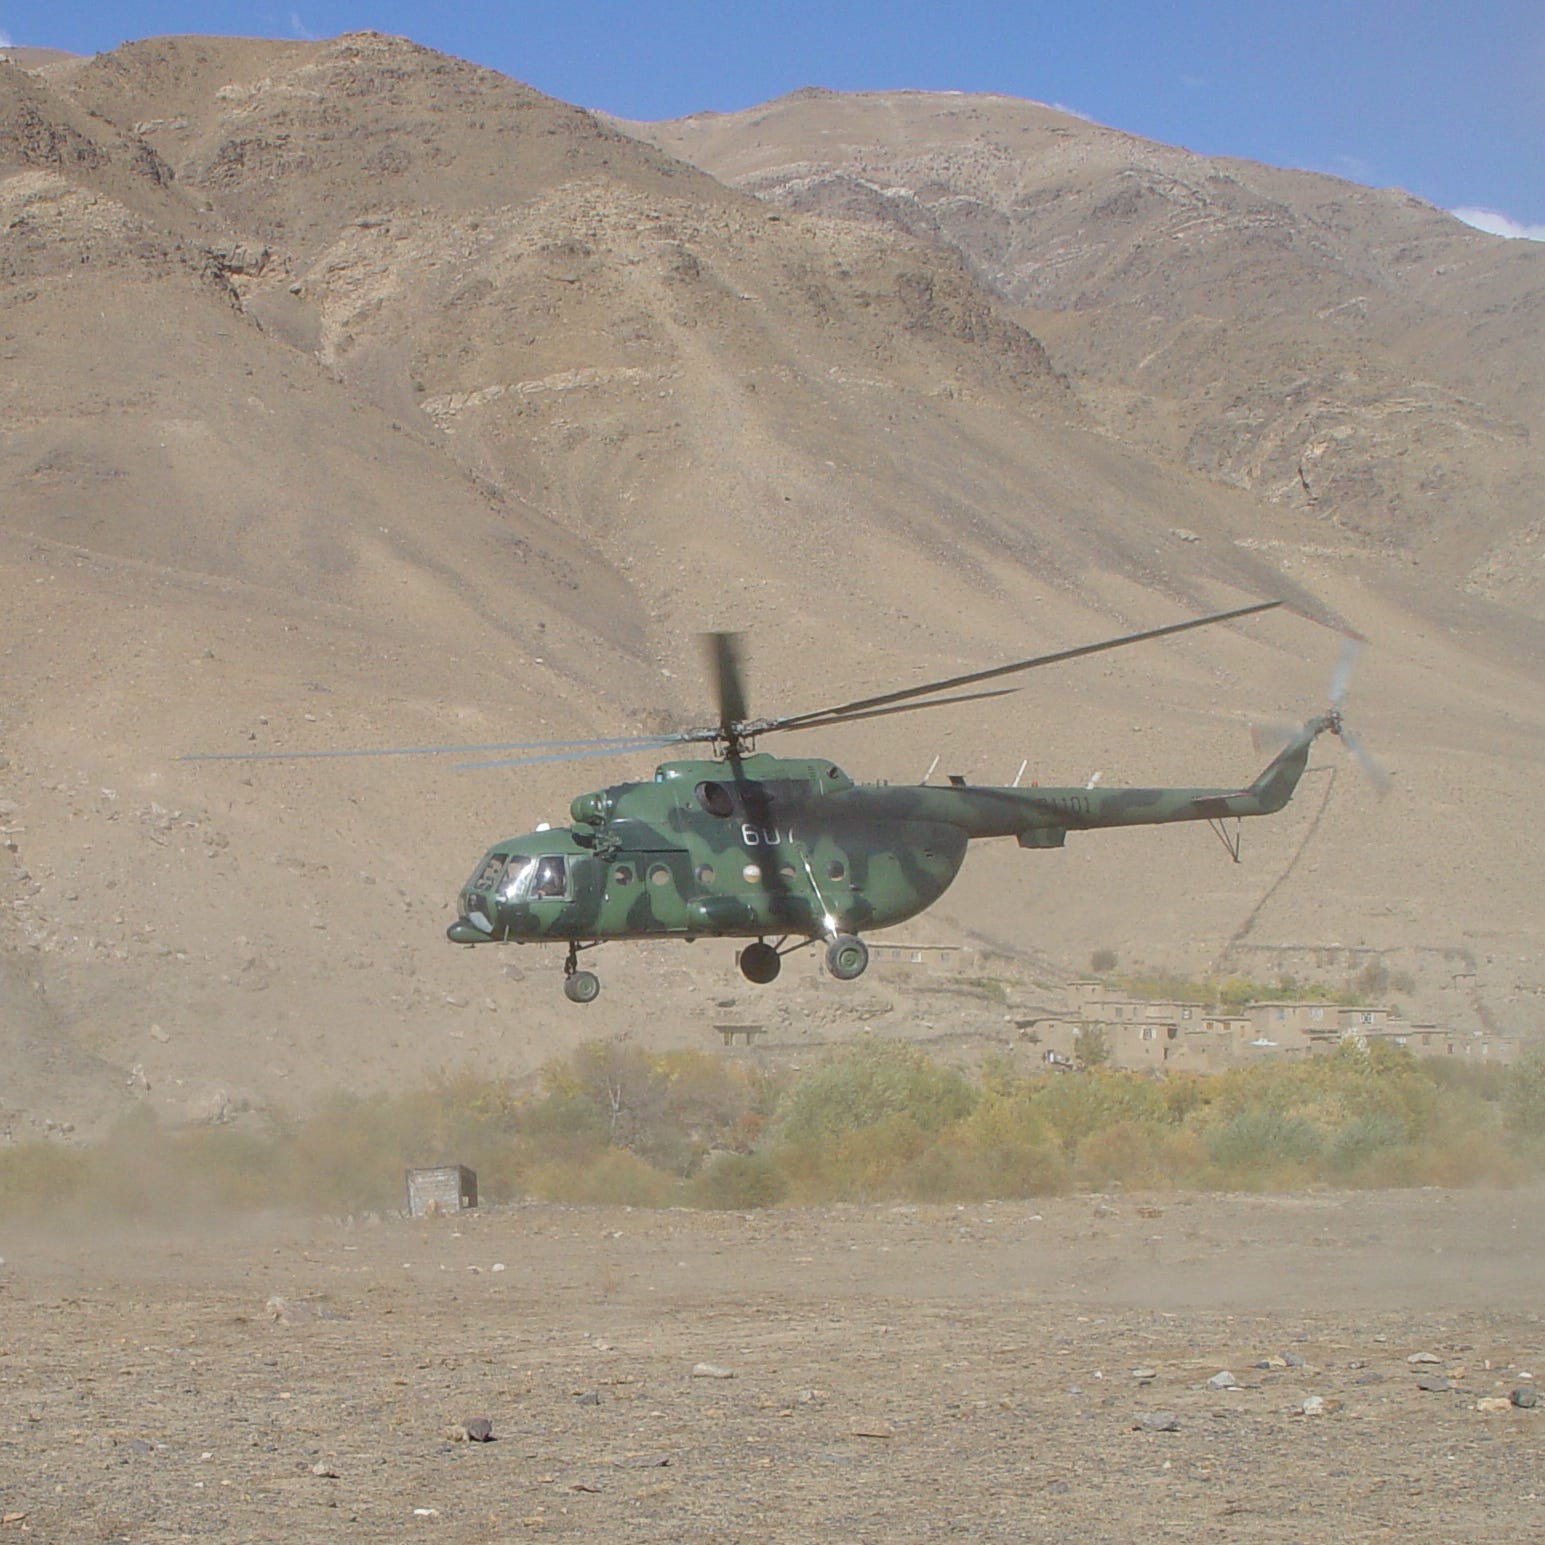 The Mi-17 used by the CIA to land its first team in Afghanistan after 9/11 is seen taking off in the Panjshir Valley in a photo taken between October 2001 and December 2001.